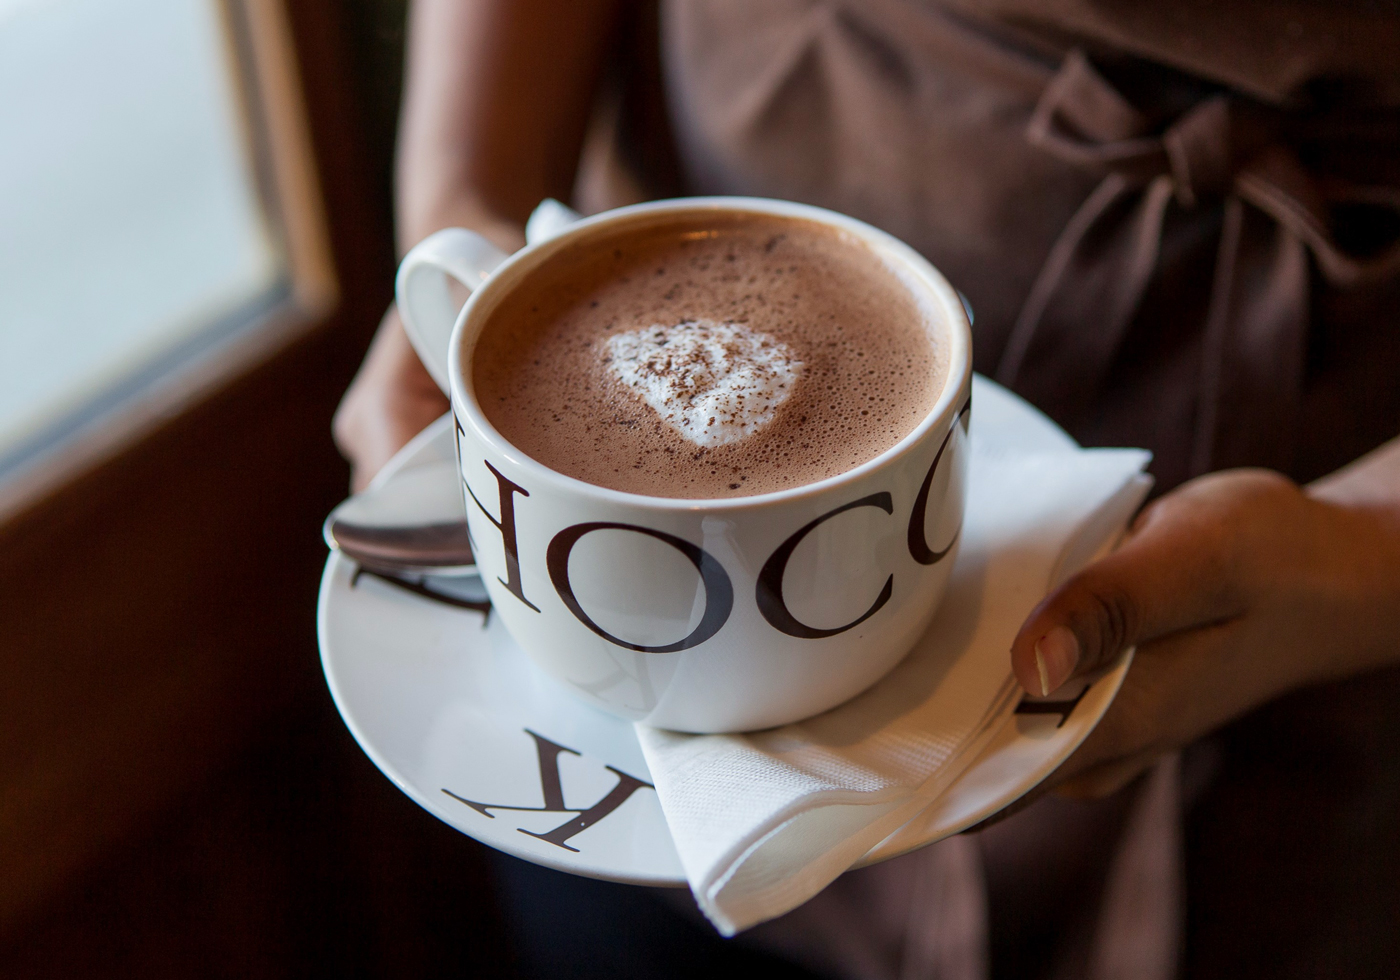 L.A. Burdick Hot Chocolate: So Much Goes Into So Much Goodness